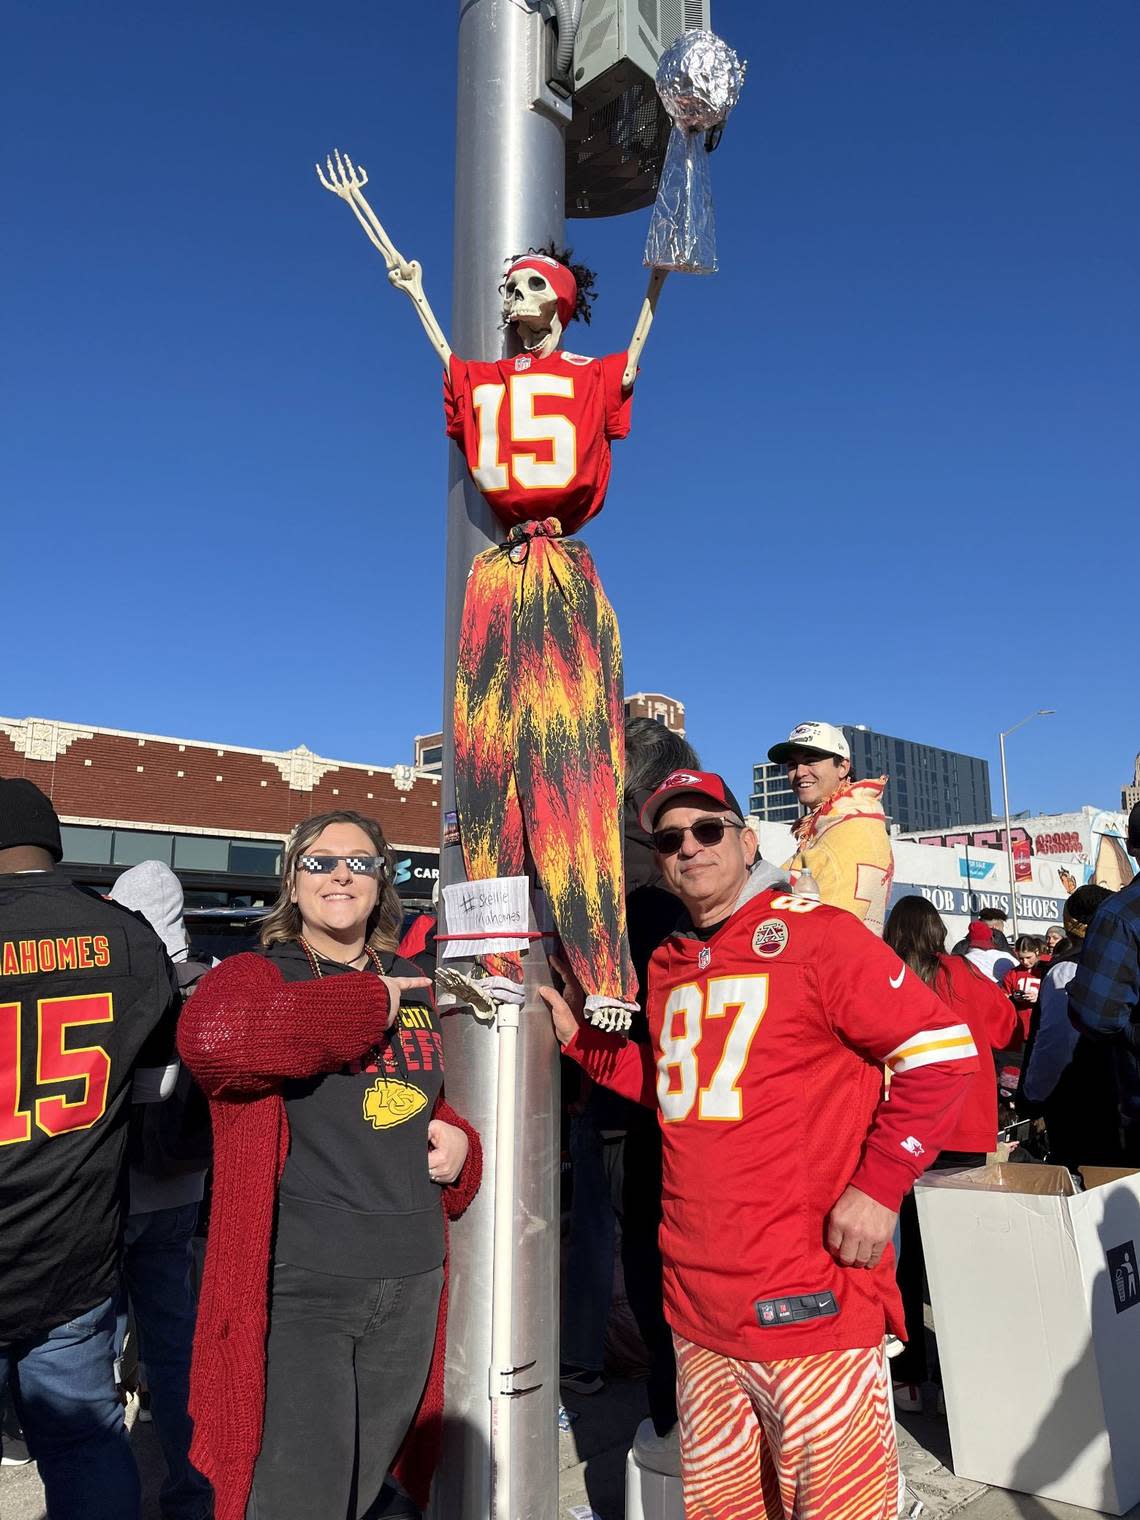 Skellie Mahomes, crafted by Emma Gariety, got a good spot on the parade route. Andrea Klick/aklick@kcstar.com